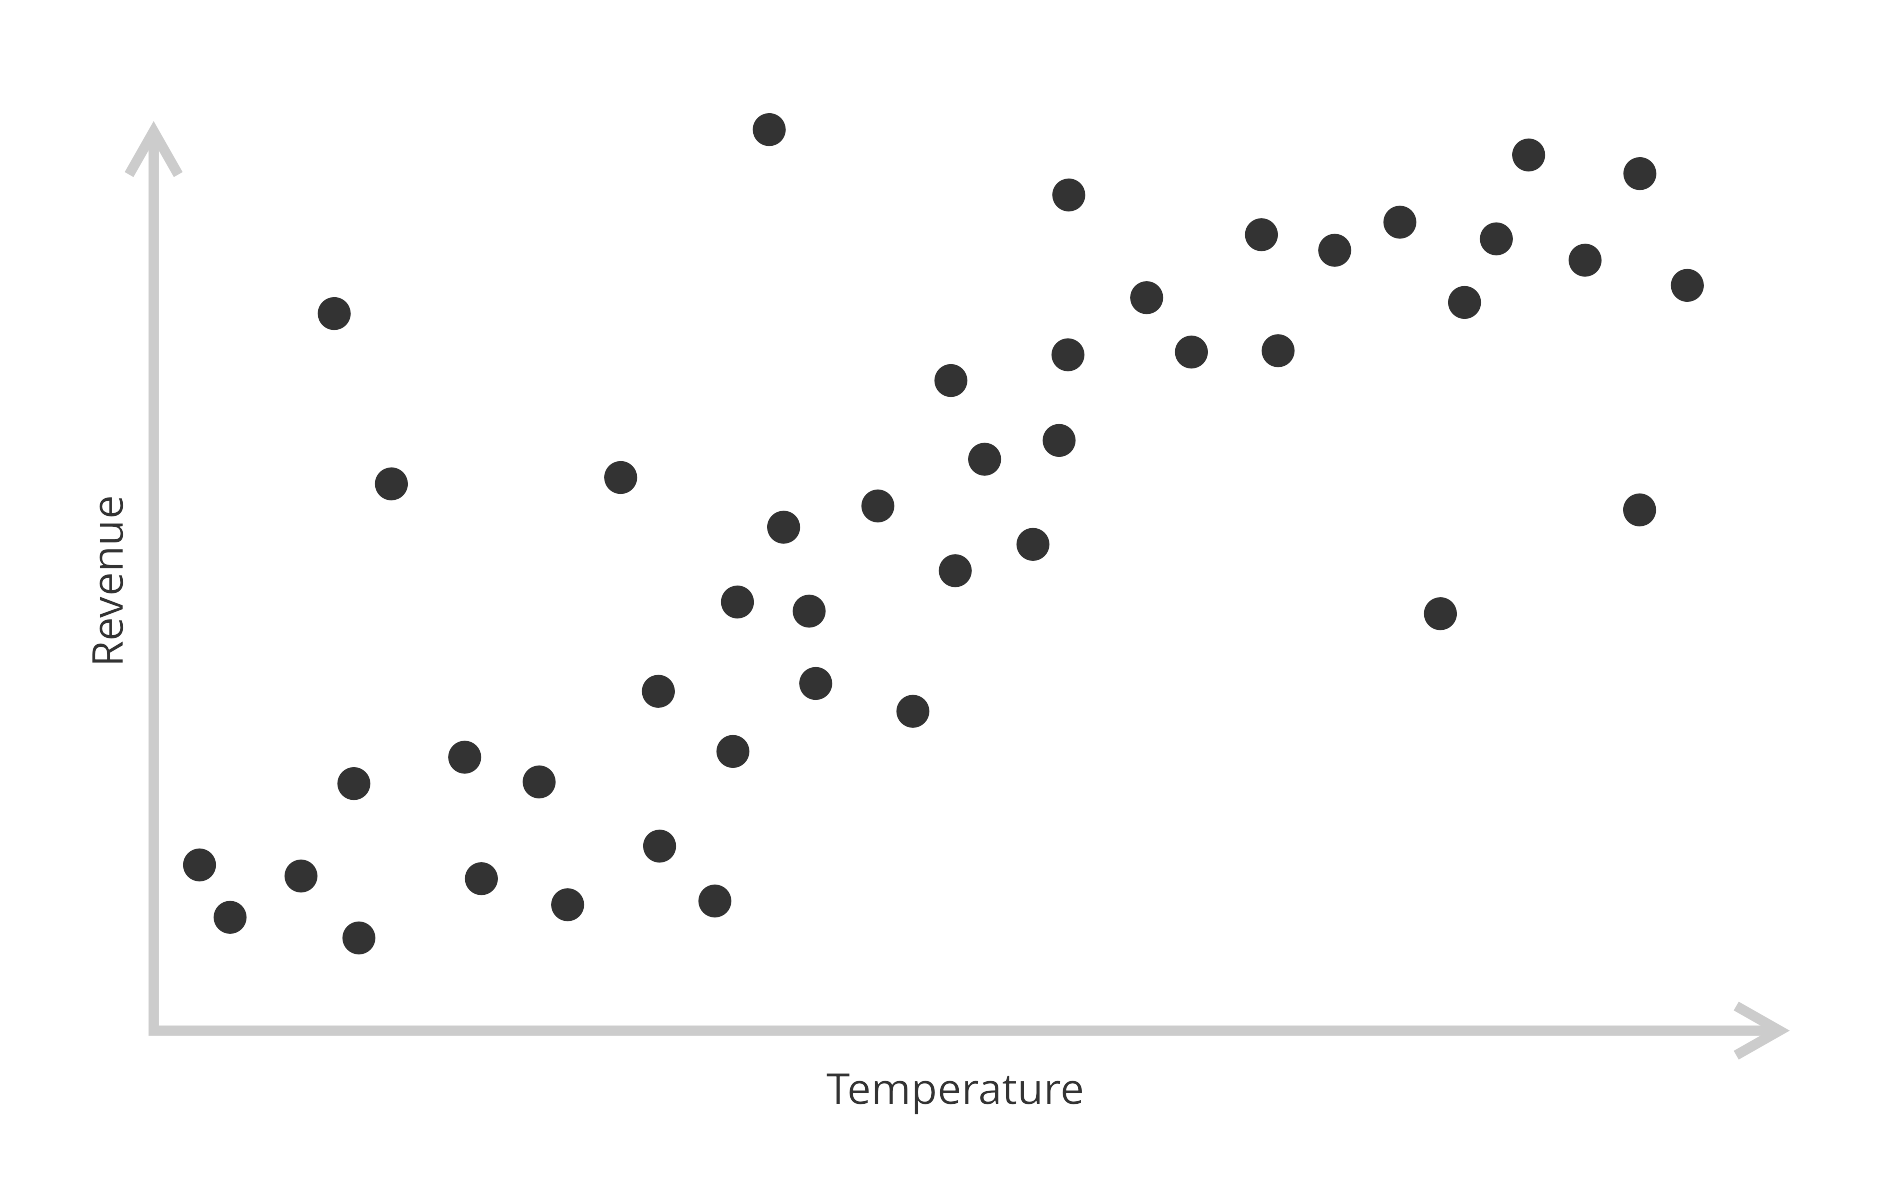 A scatter plot showing the same correlation with some outliers and
noise